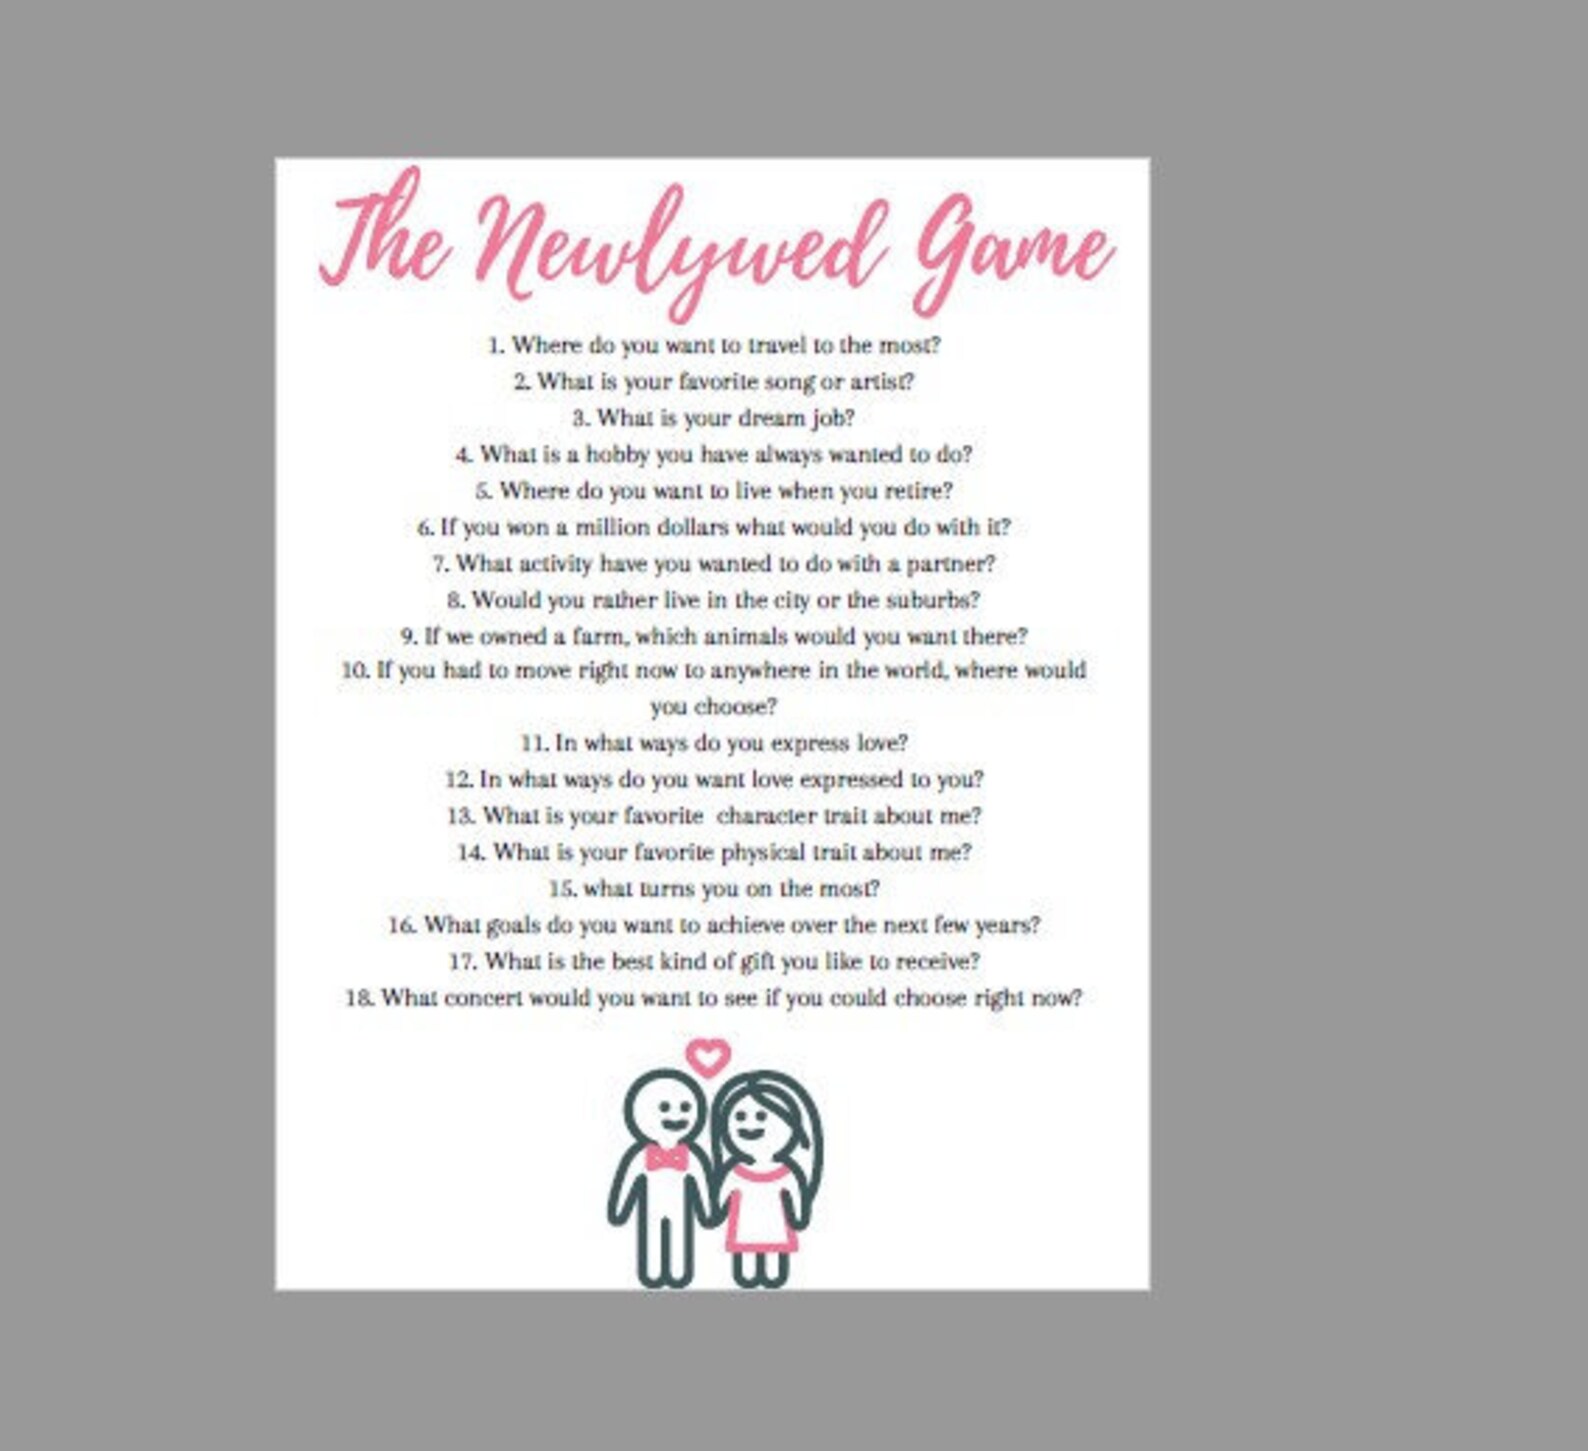 Wedding Games Newlywed Game Bride And Groom Downloadable Etsy 